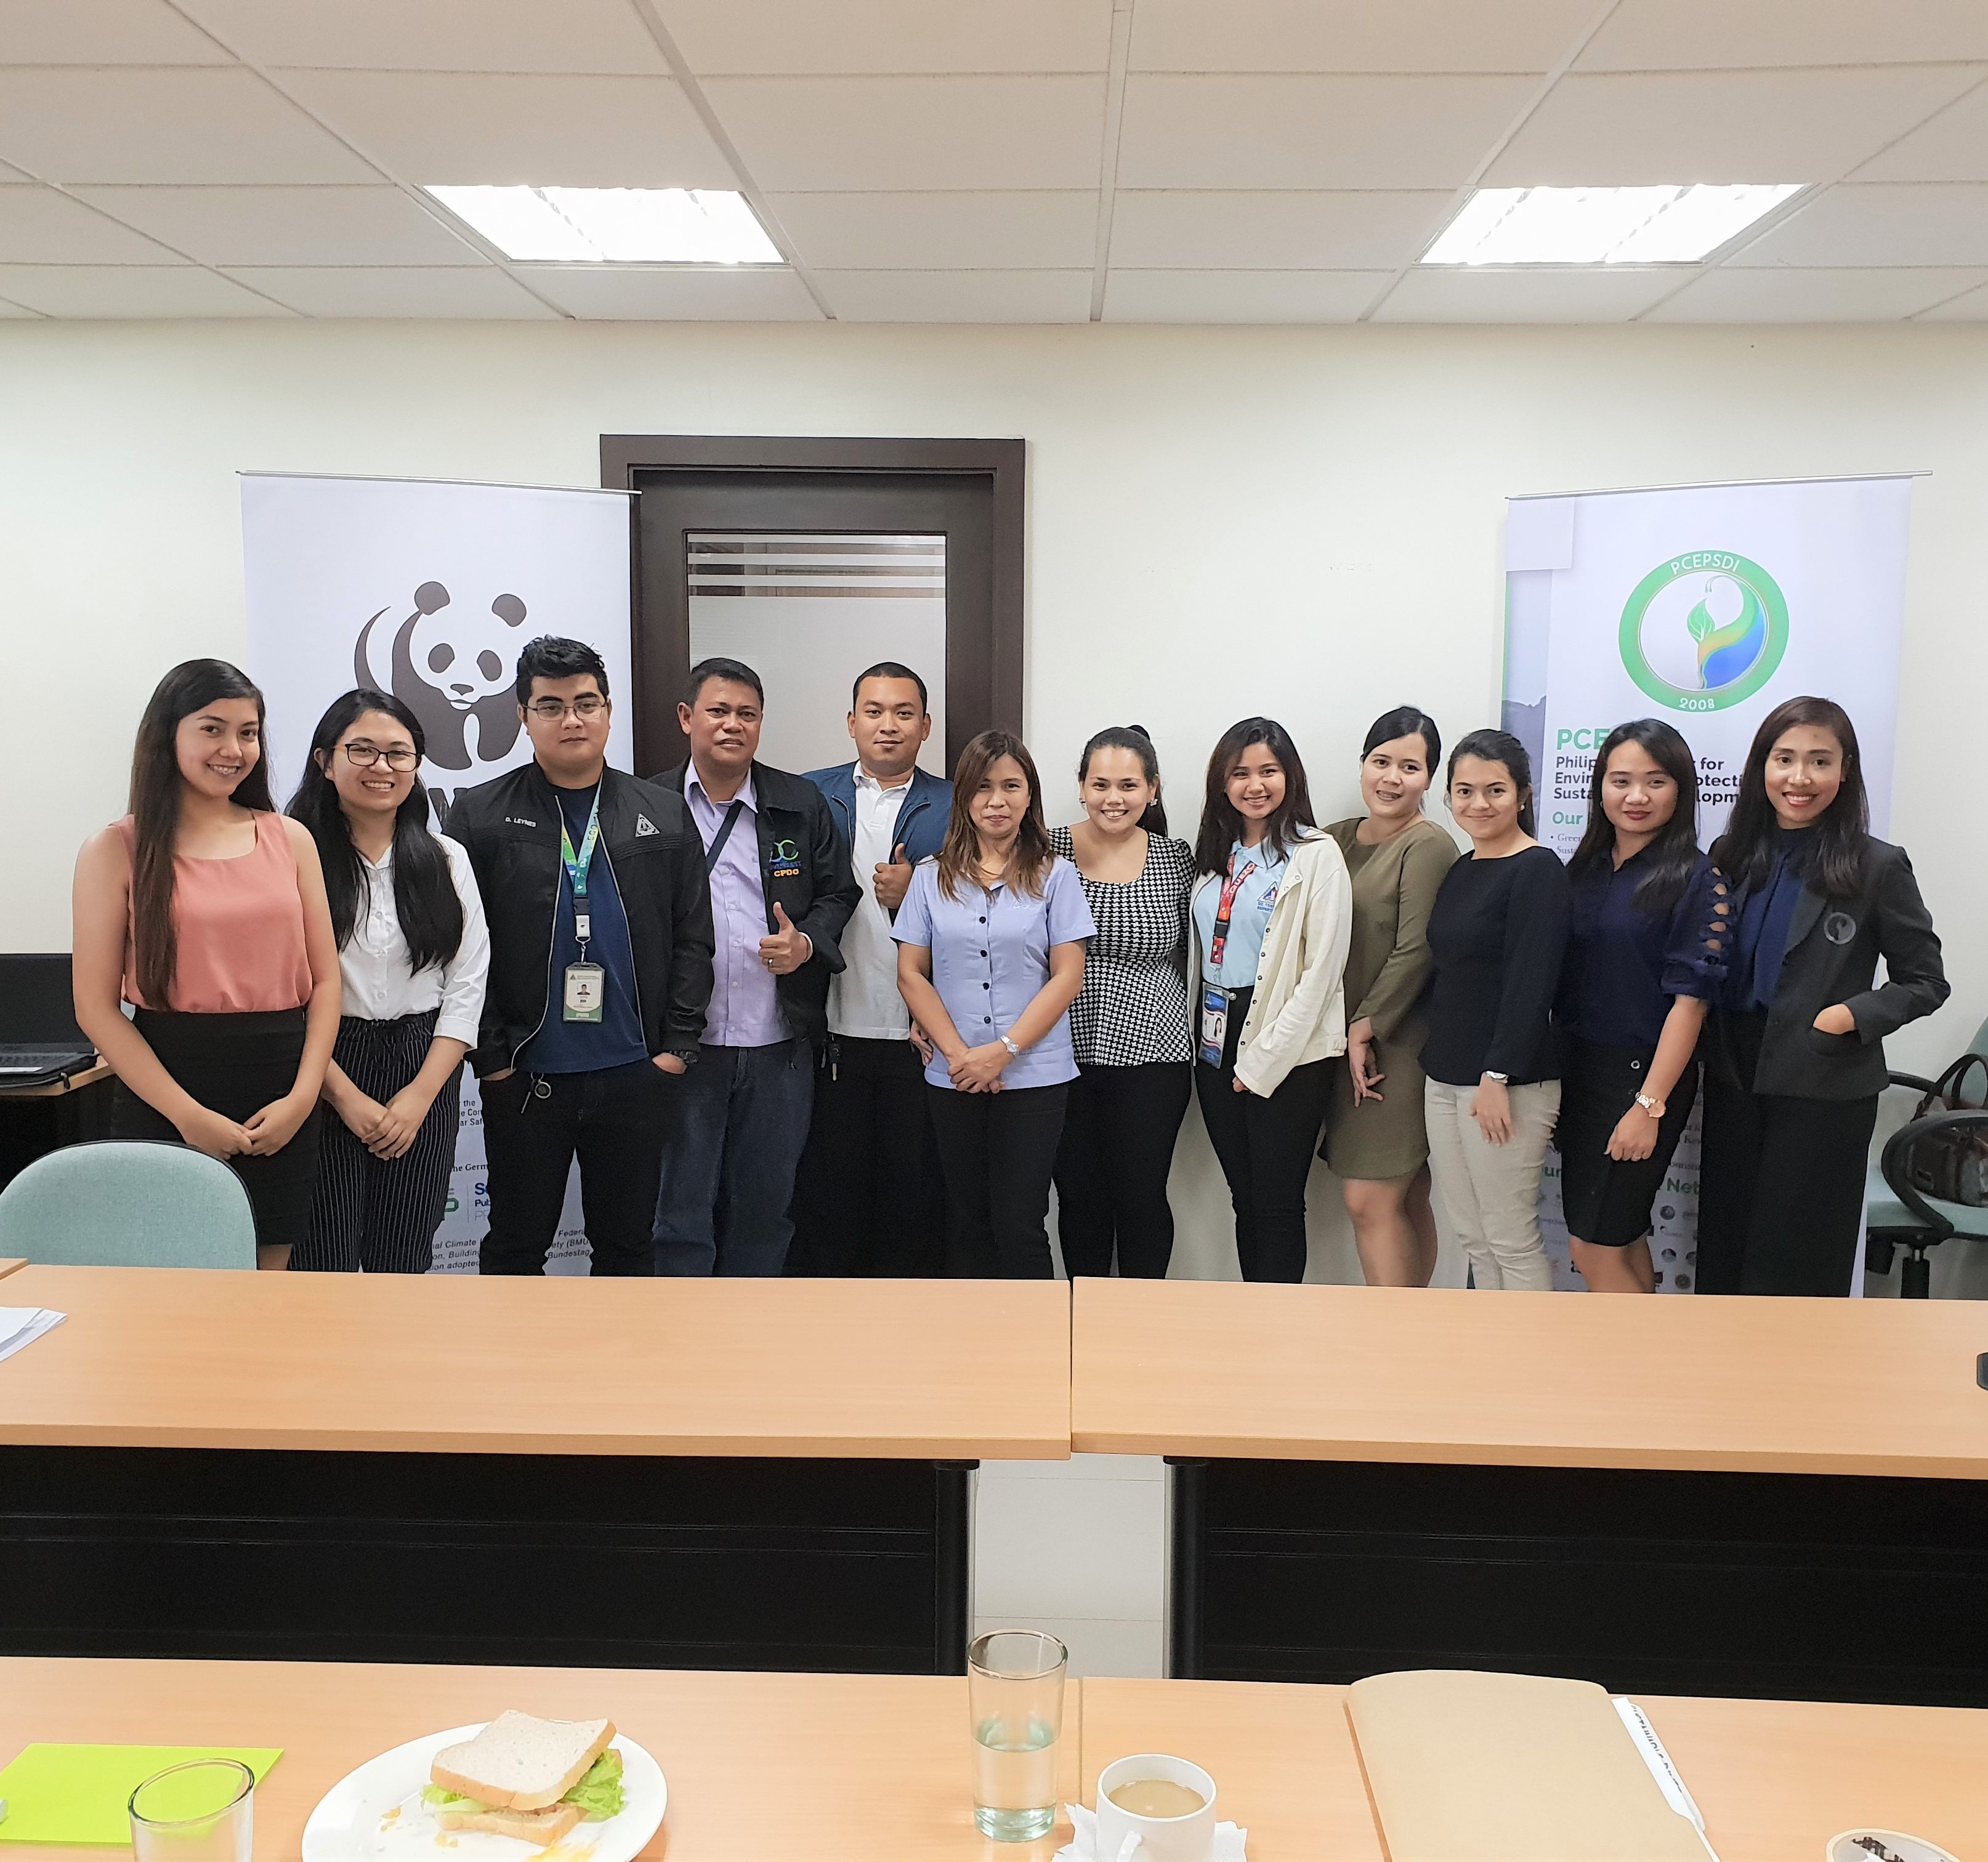 <h1>Policy Planning with Quezon City LGU</h1>
<p>Last January 24, 2019, World Wide Fund for Nature (WWF) Philippines’</p>
<p style="text-align: right;"><a href="https://support.wwf.org.ph/what-we-do/food/thesustainablediner/scp-policy-planning-2019/" target="_blank">Read More &gt;</a></p>